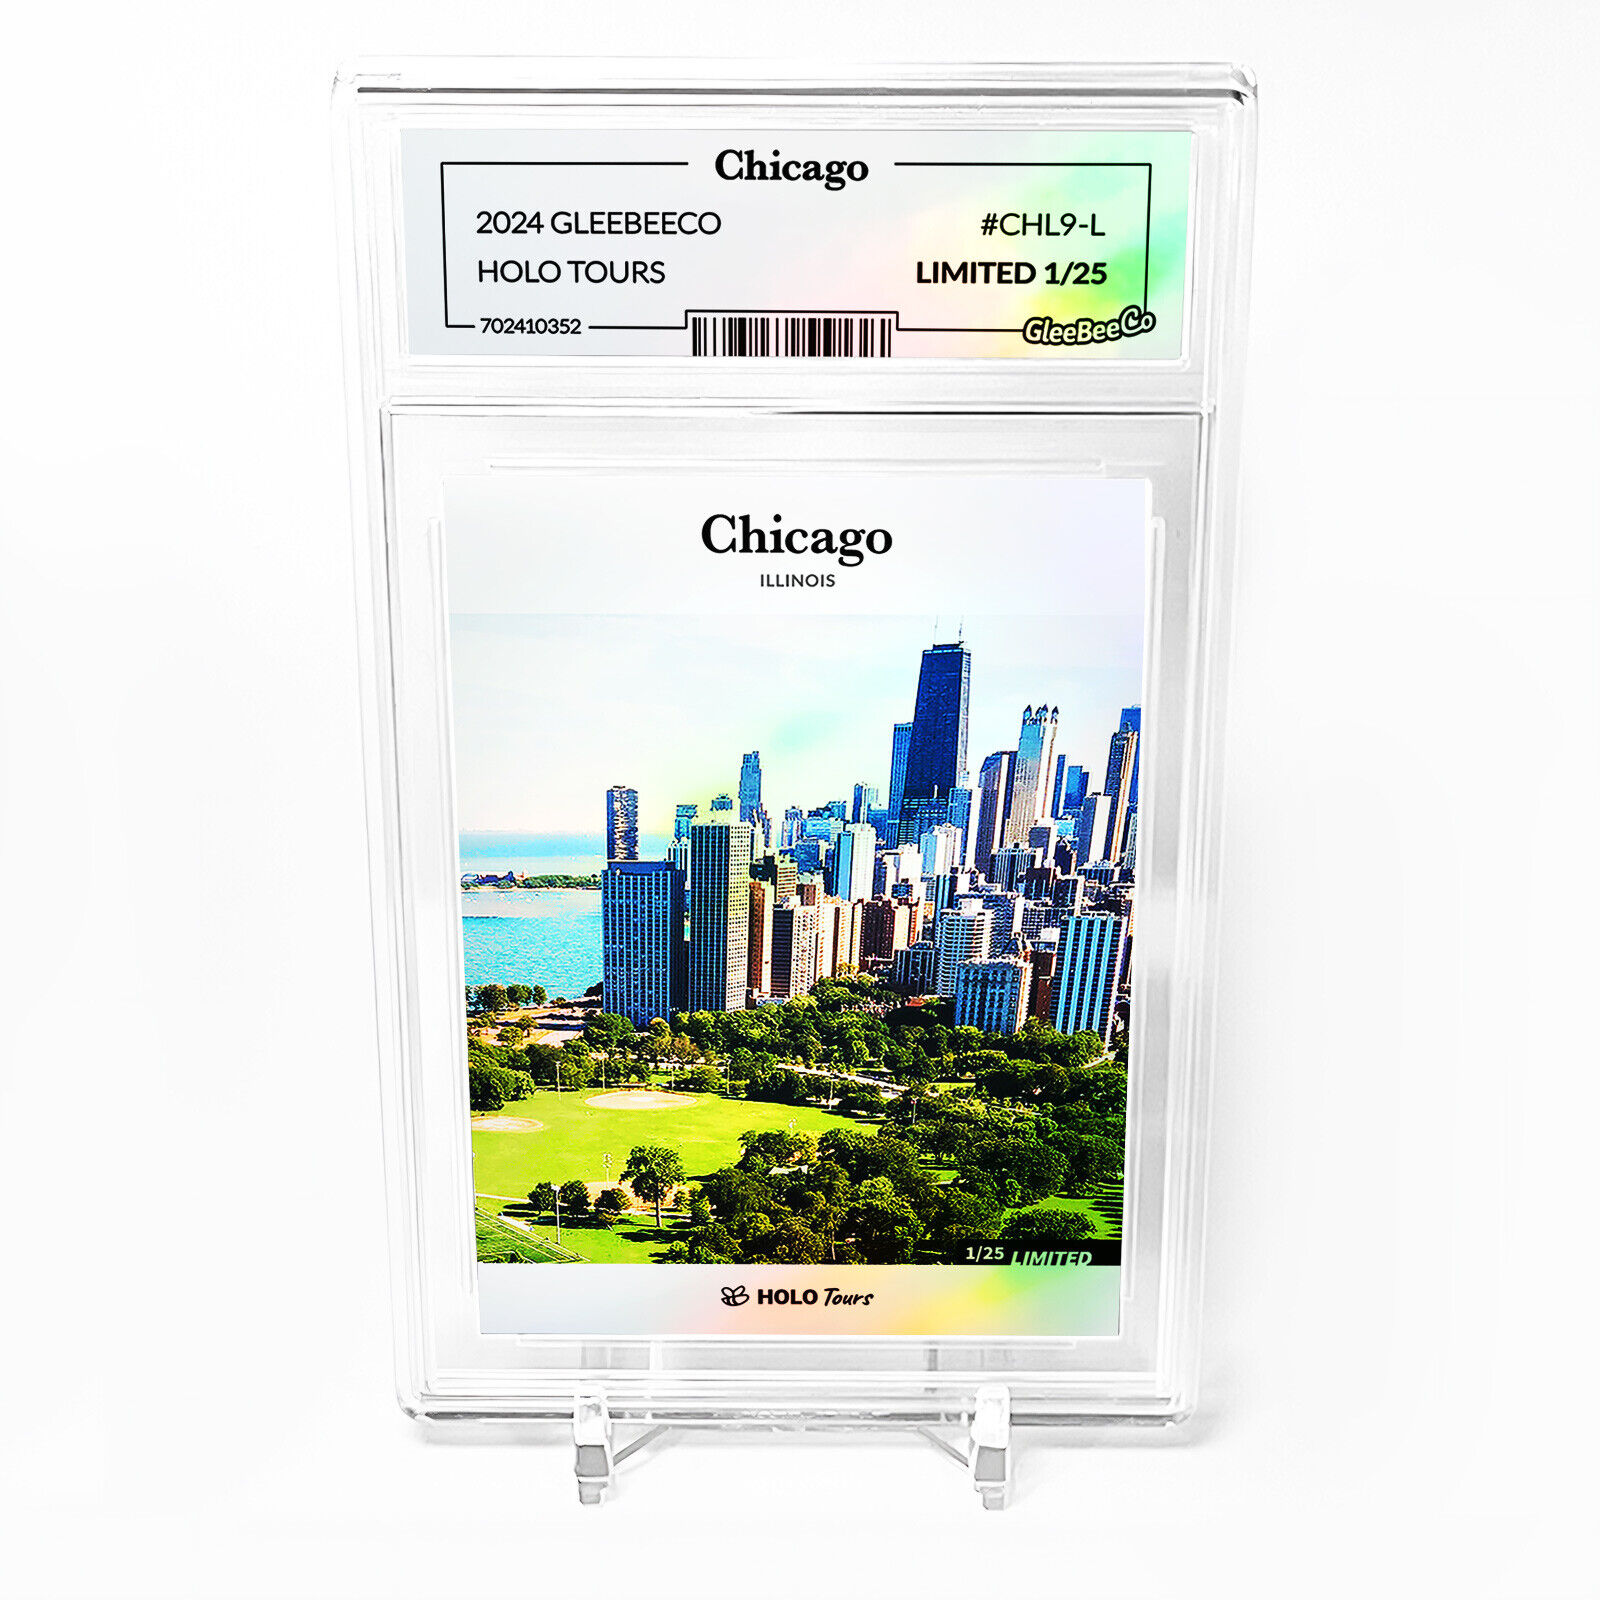 CHICAGO Illinois Card 2024 GleeBeeCo Holo Tours (Slab) #CHL9-L Only /25